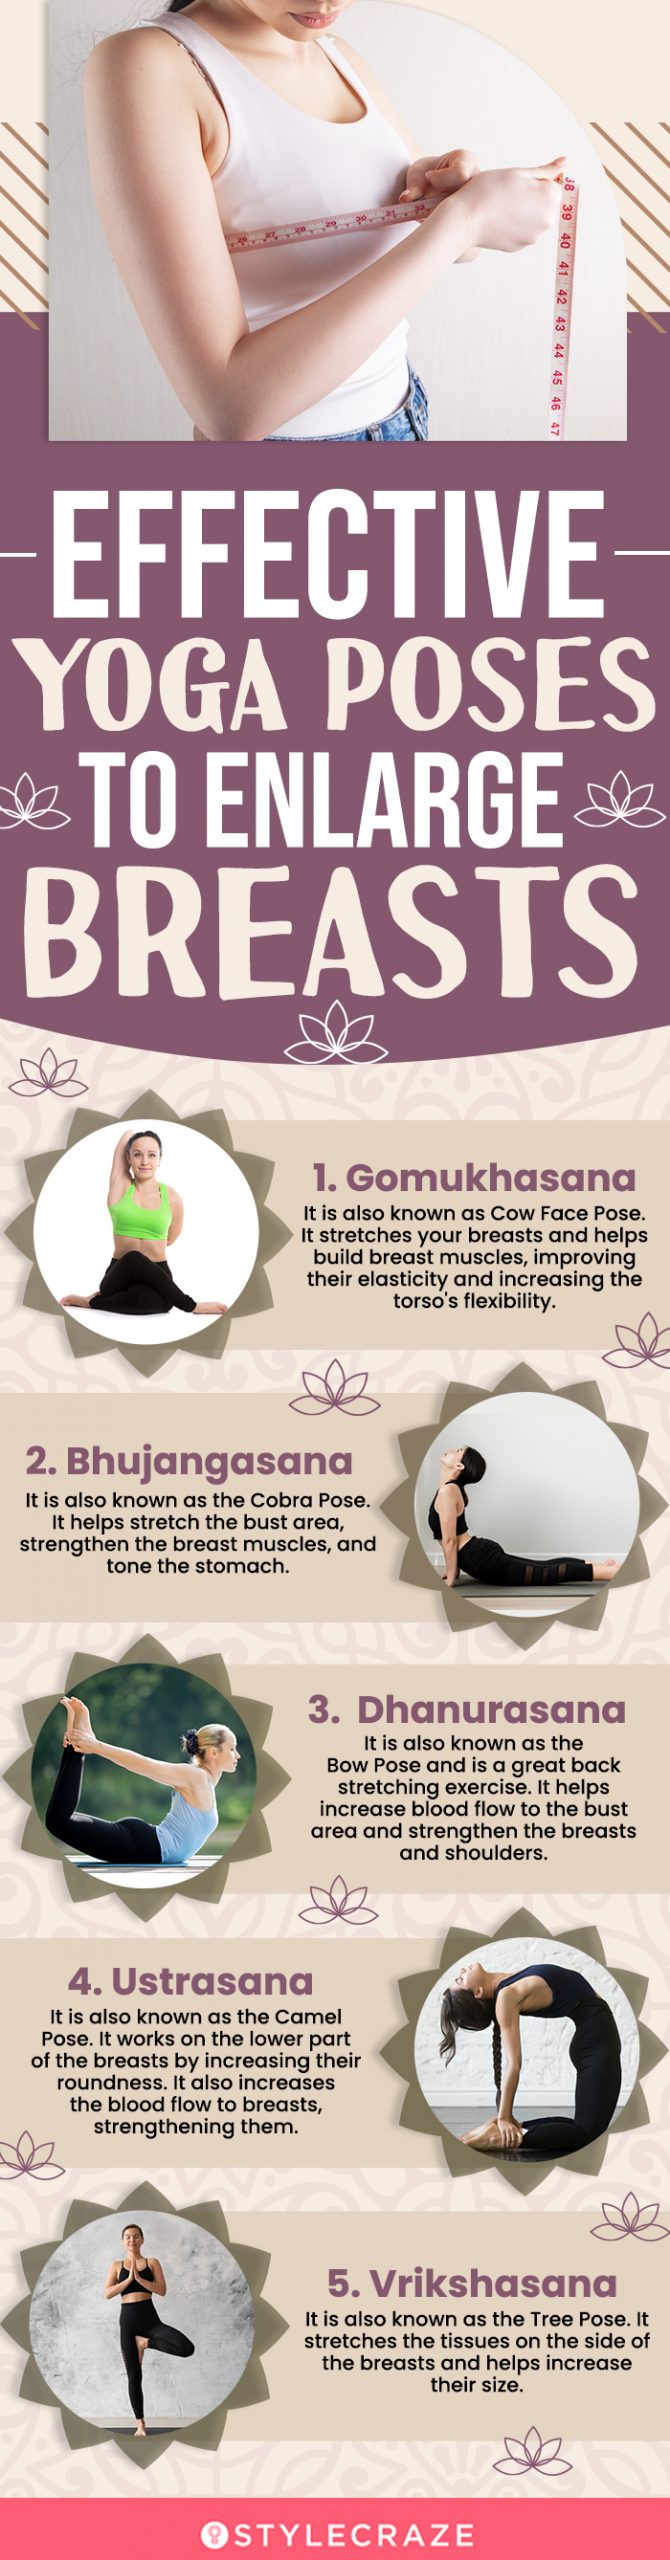 effective yoga poses to enlarge breasts (infographic)